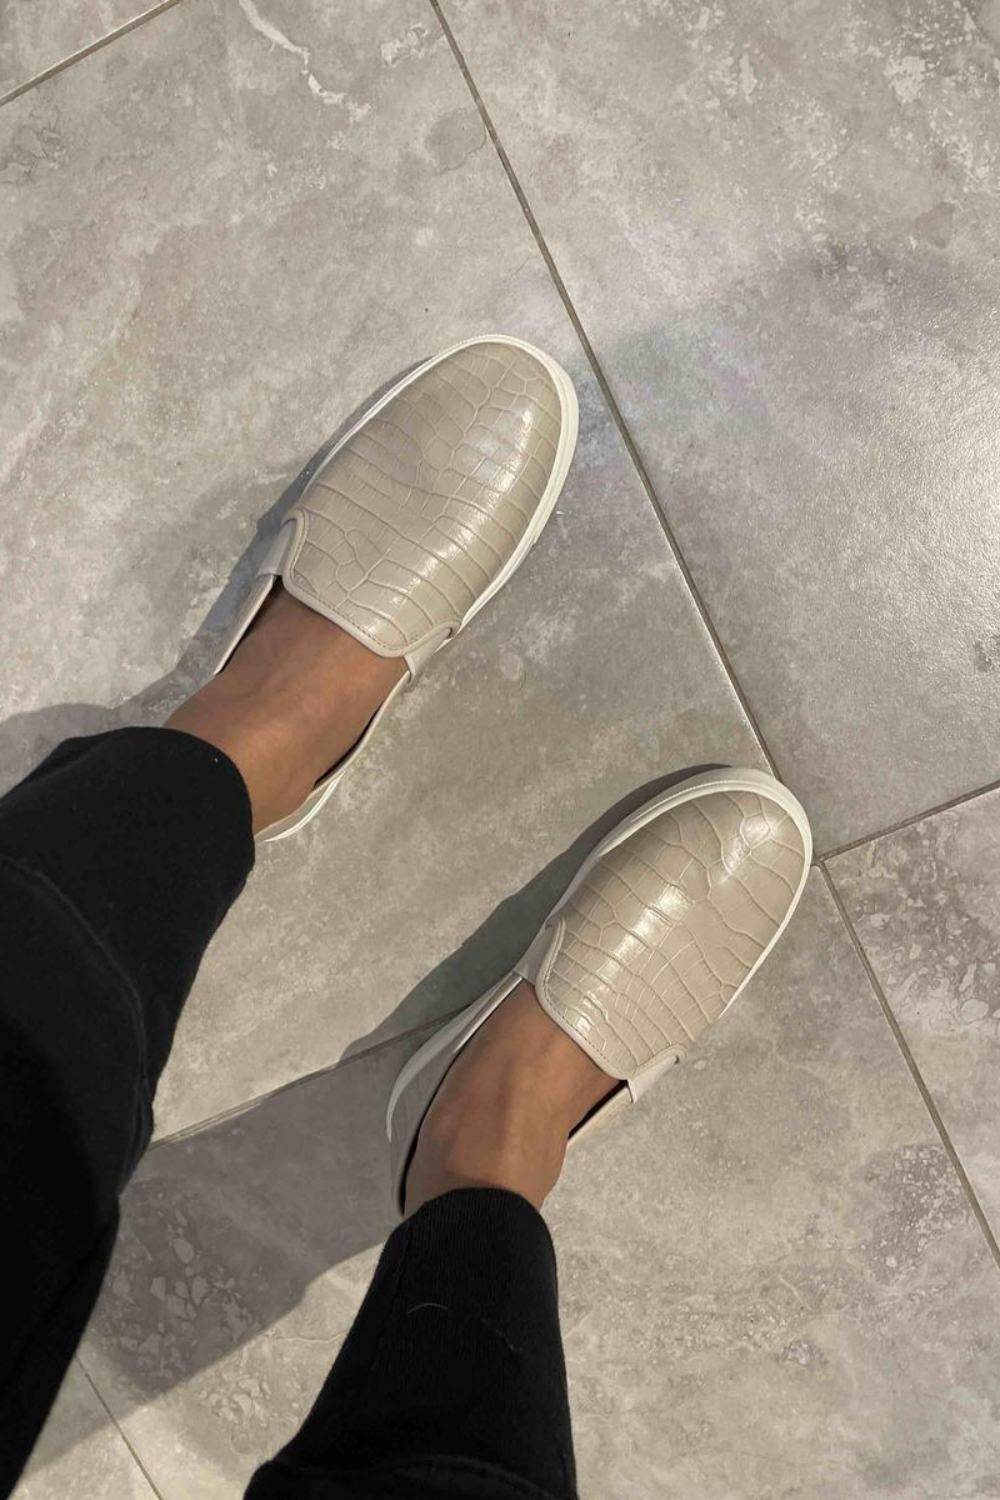 Slip On Sneakers for Airport